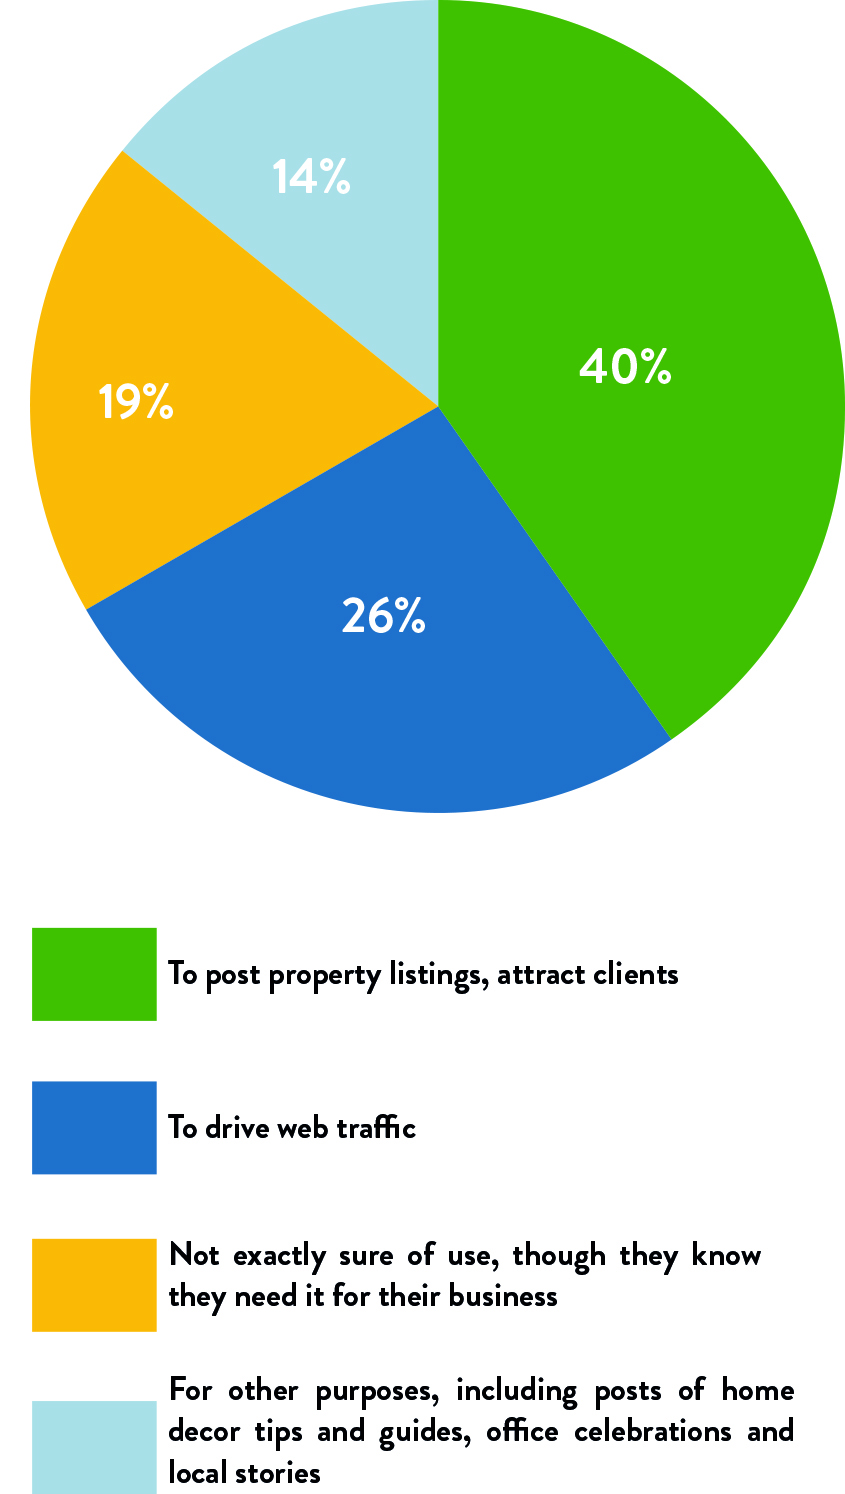 Whitepaper: The Current State of Social Media in Real Estate